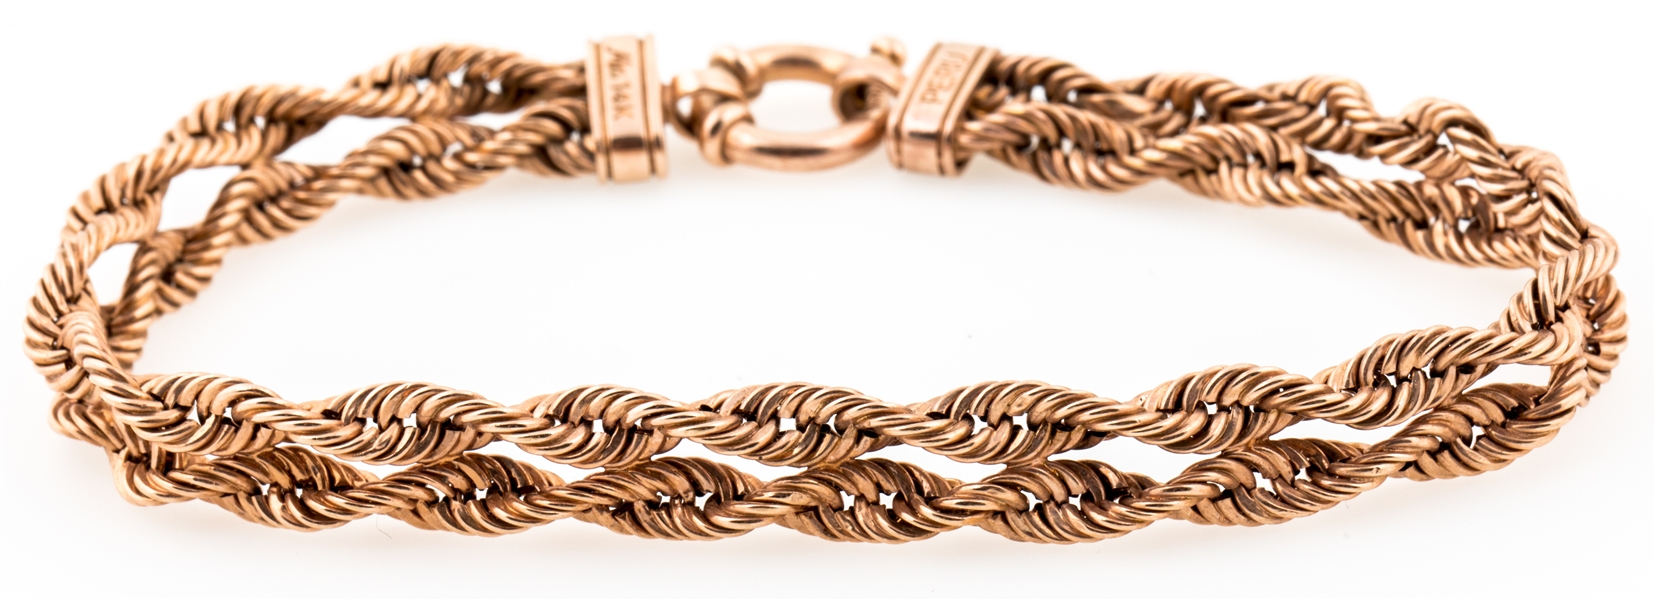 MICHAEL ANTHONY 14K ROSE GOLD TWISTED CHAIN BRACELET